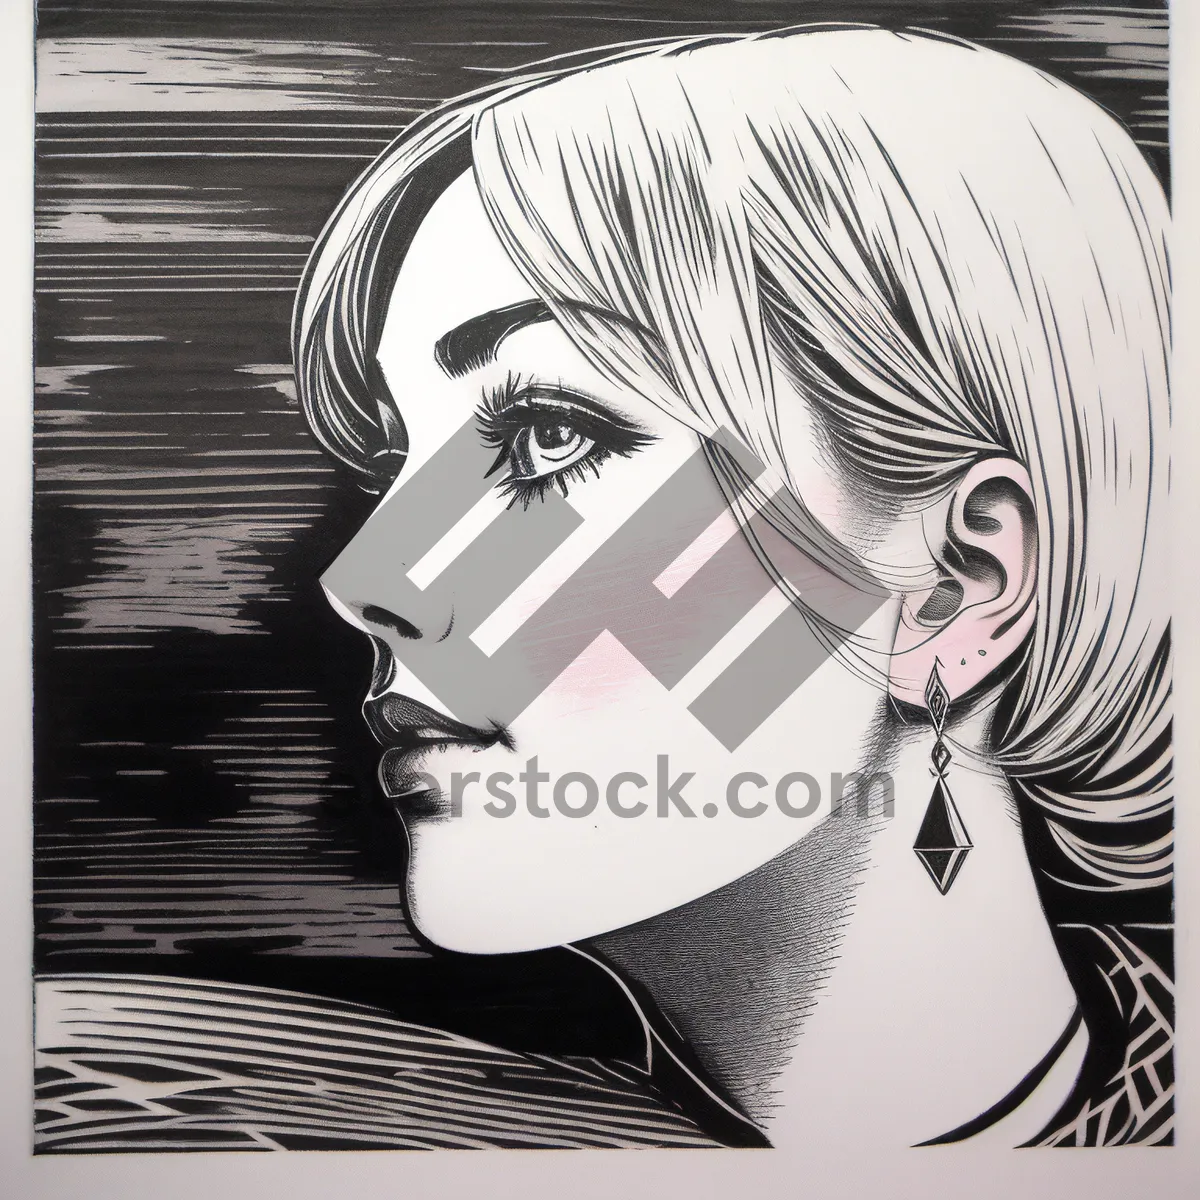 Picture of Stylish Zebra Portrait: Sketch of a Fashionable Model with Attractive Features